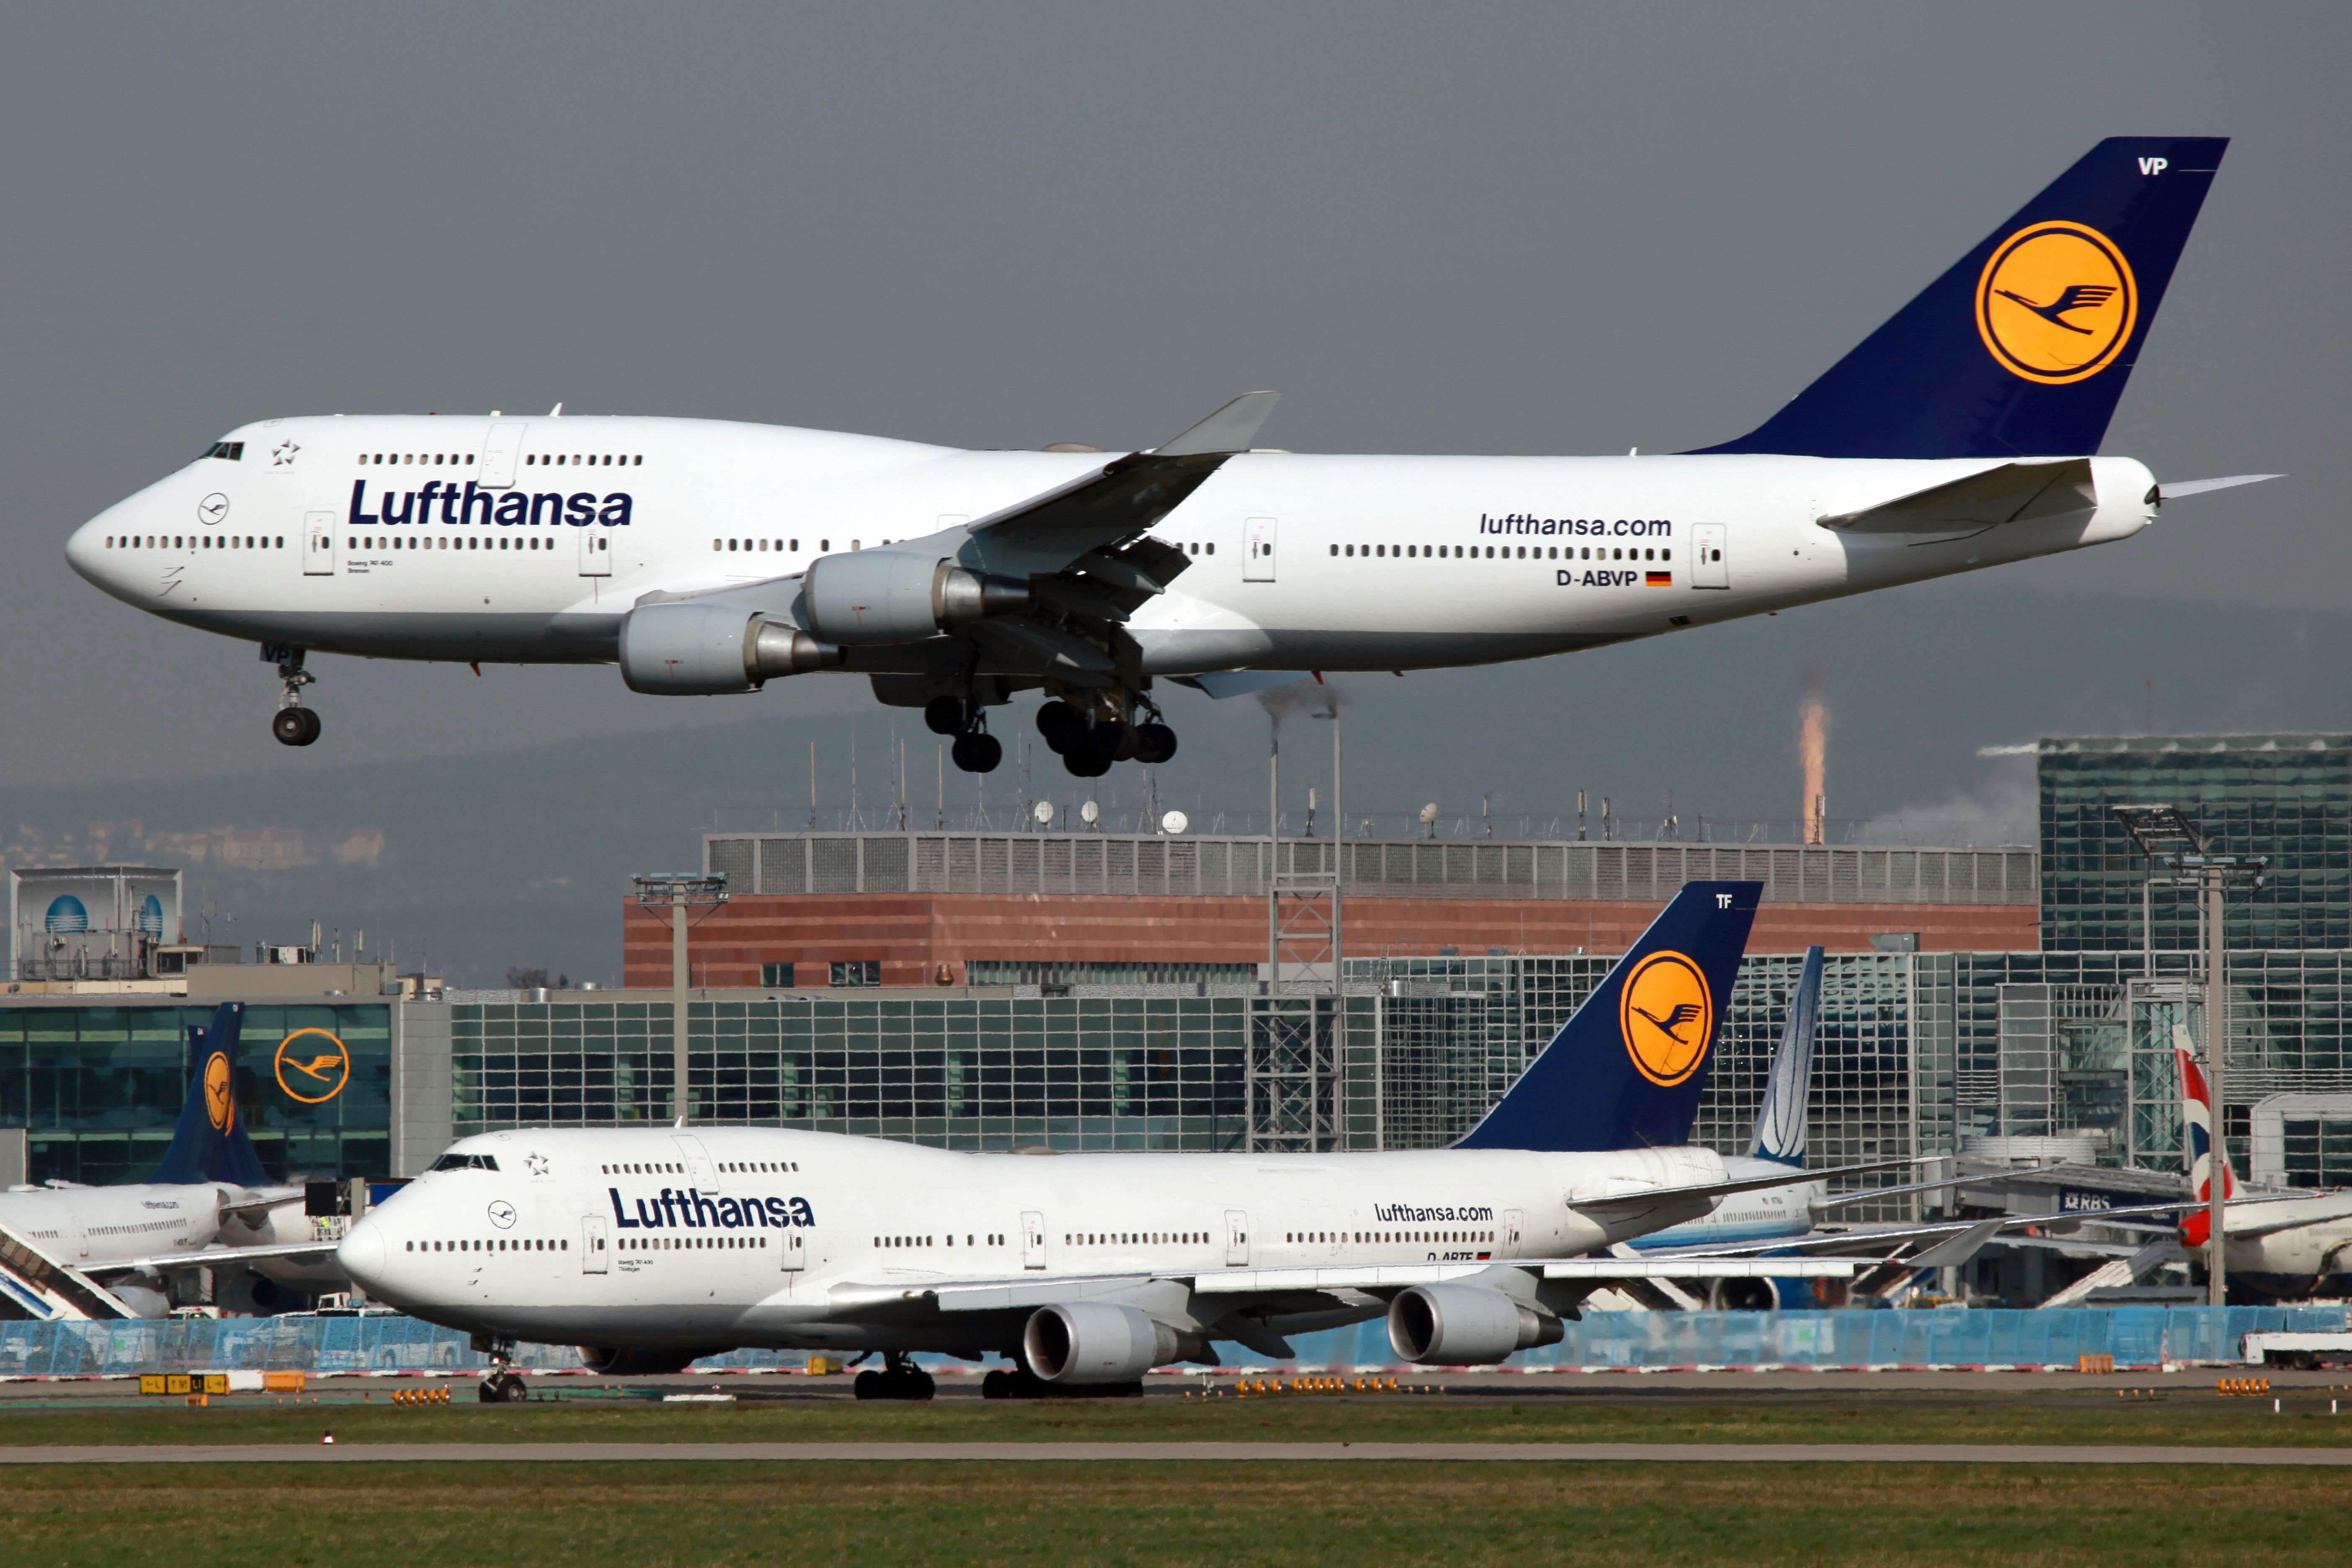 Two Lufthansa Boeing 747s, one taxiing while the other is about to land.